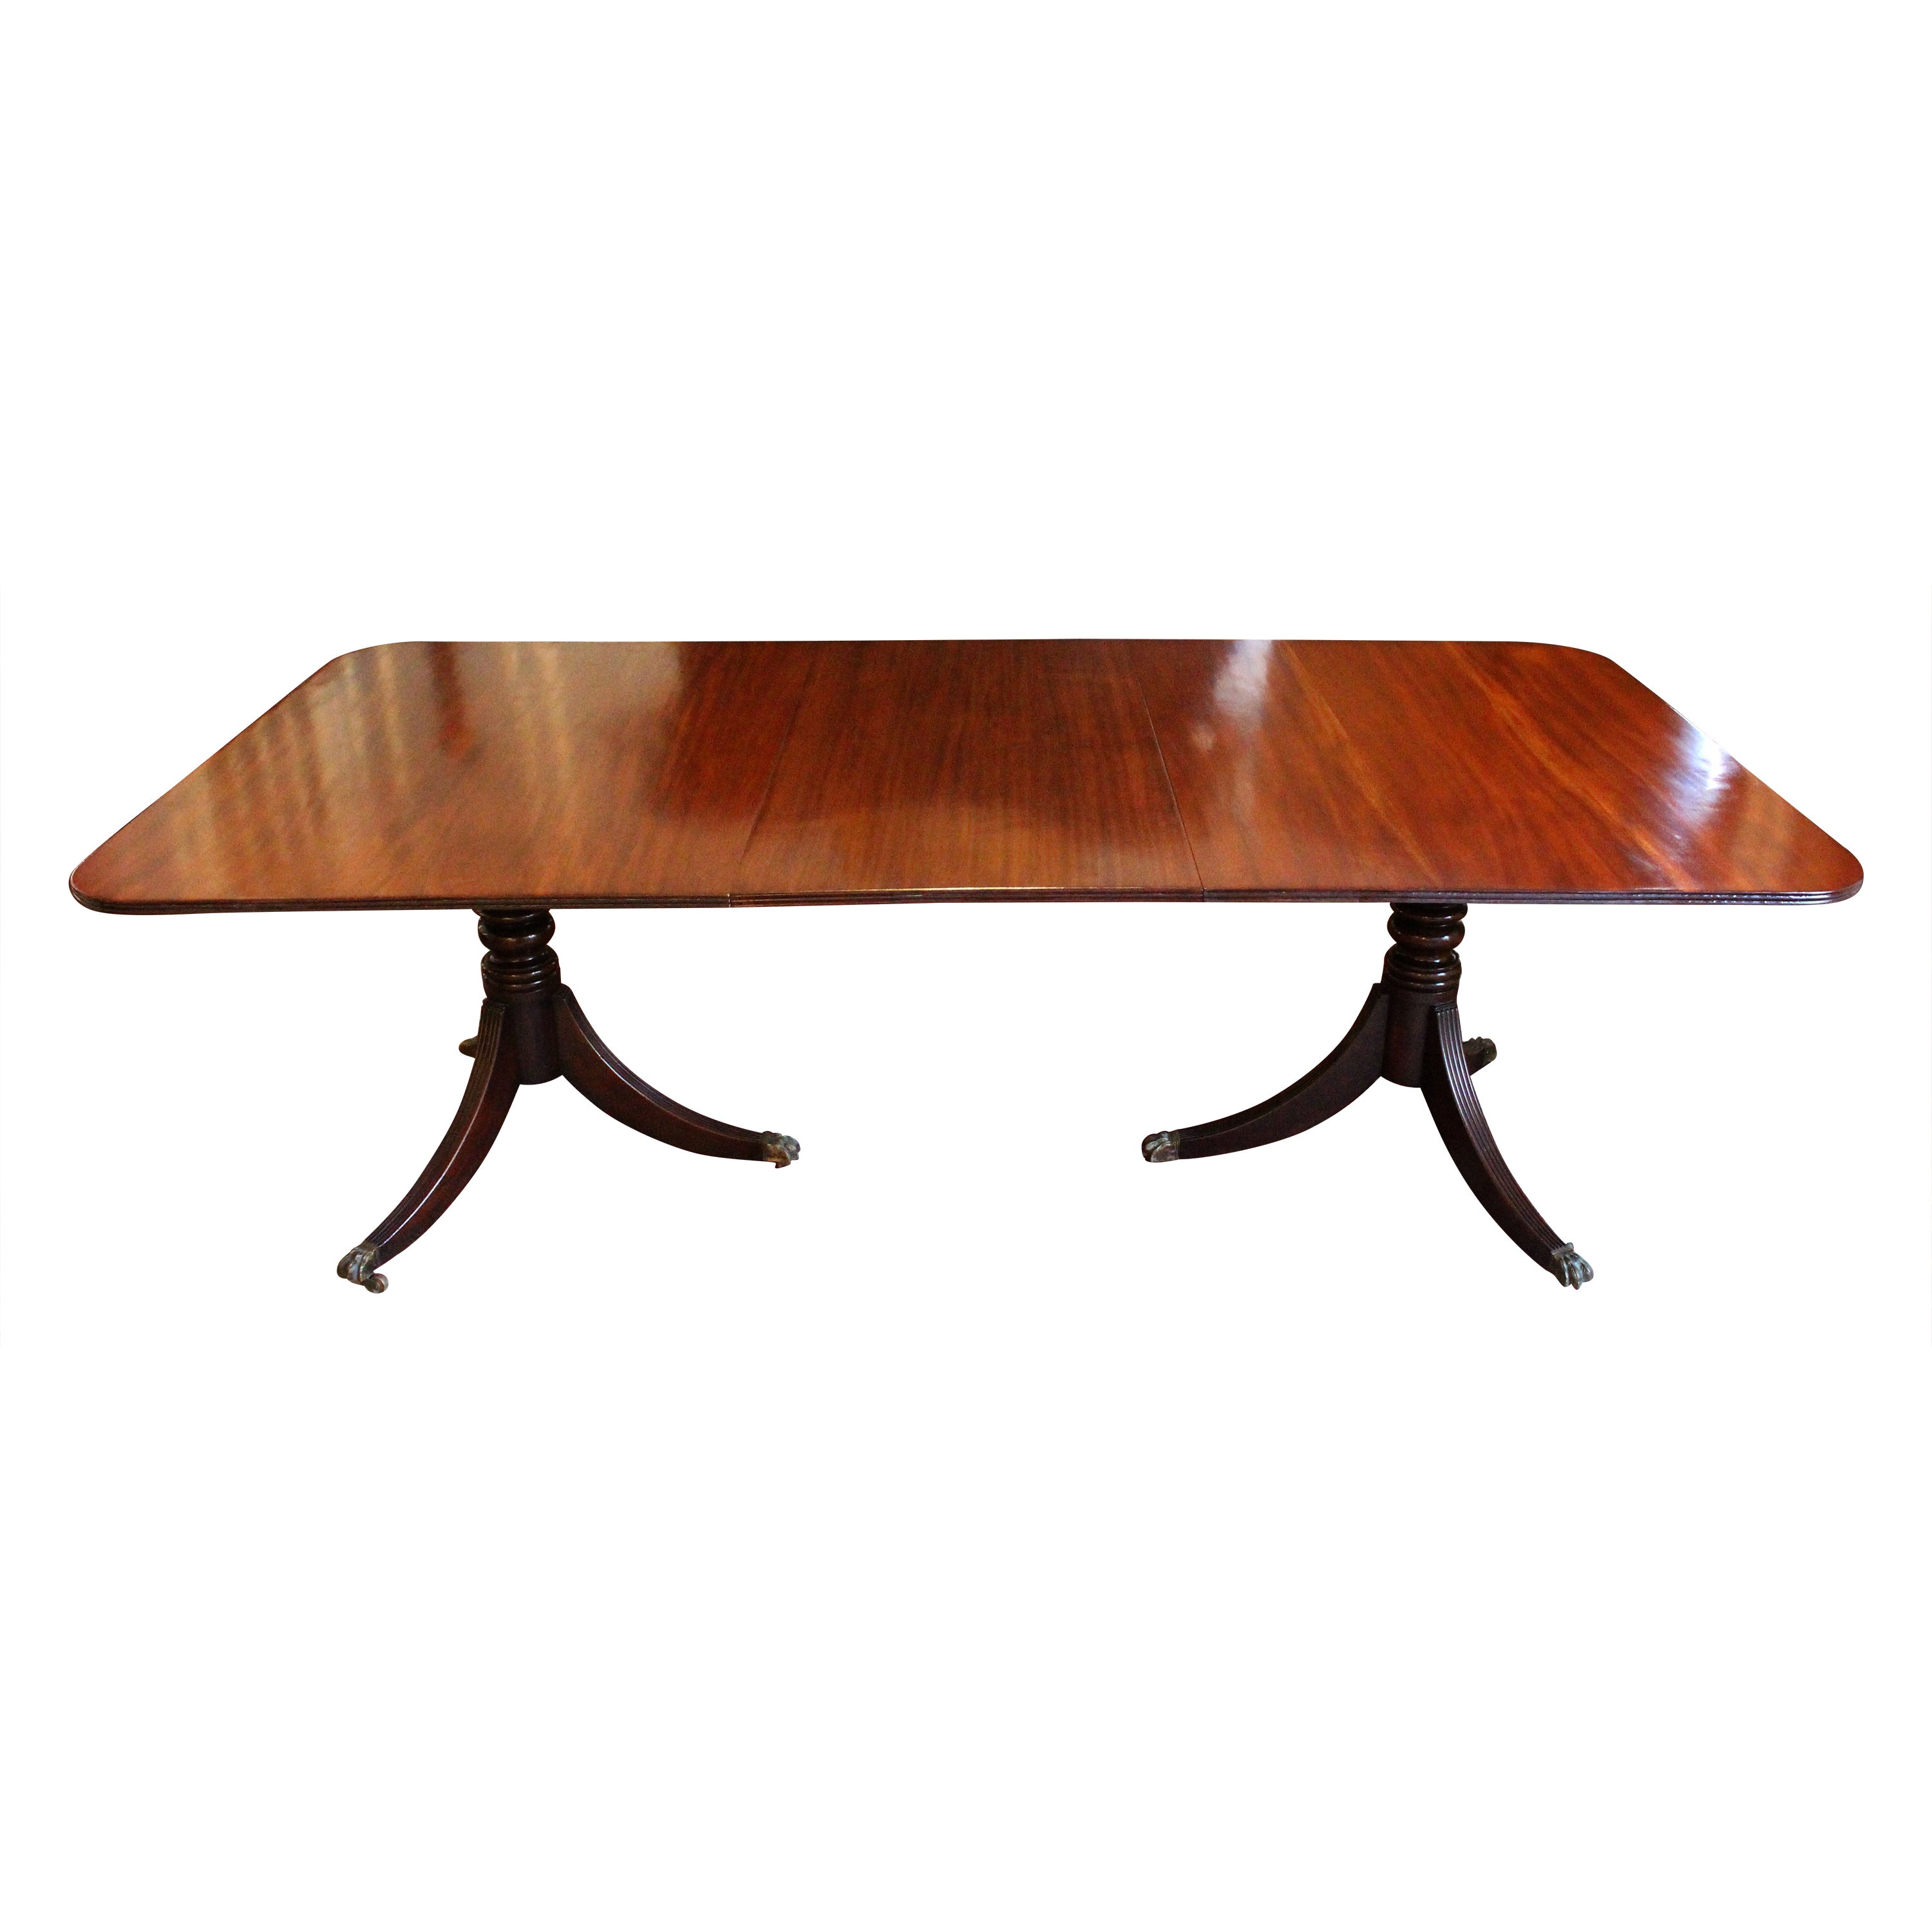 English c. 1835 William IV Period Dining Table For Sale